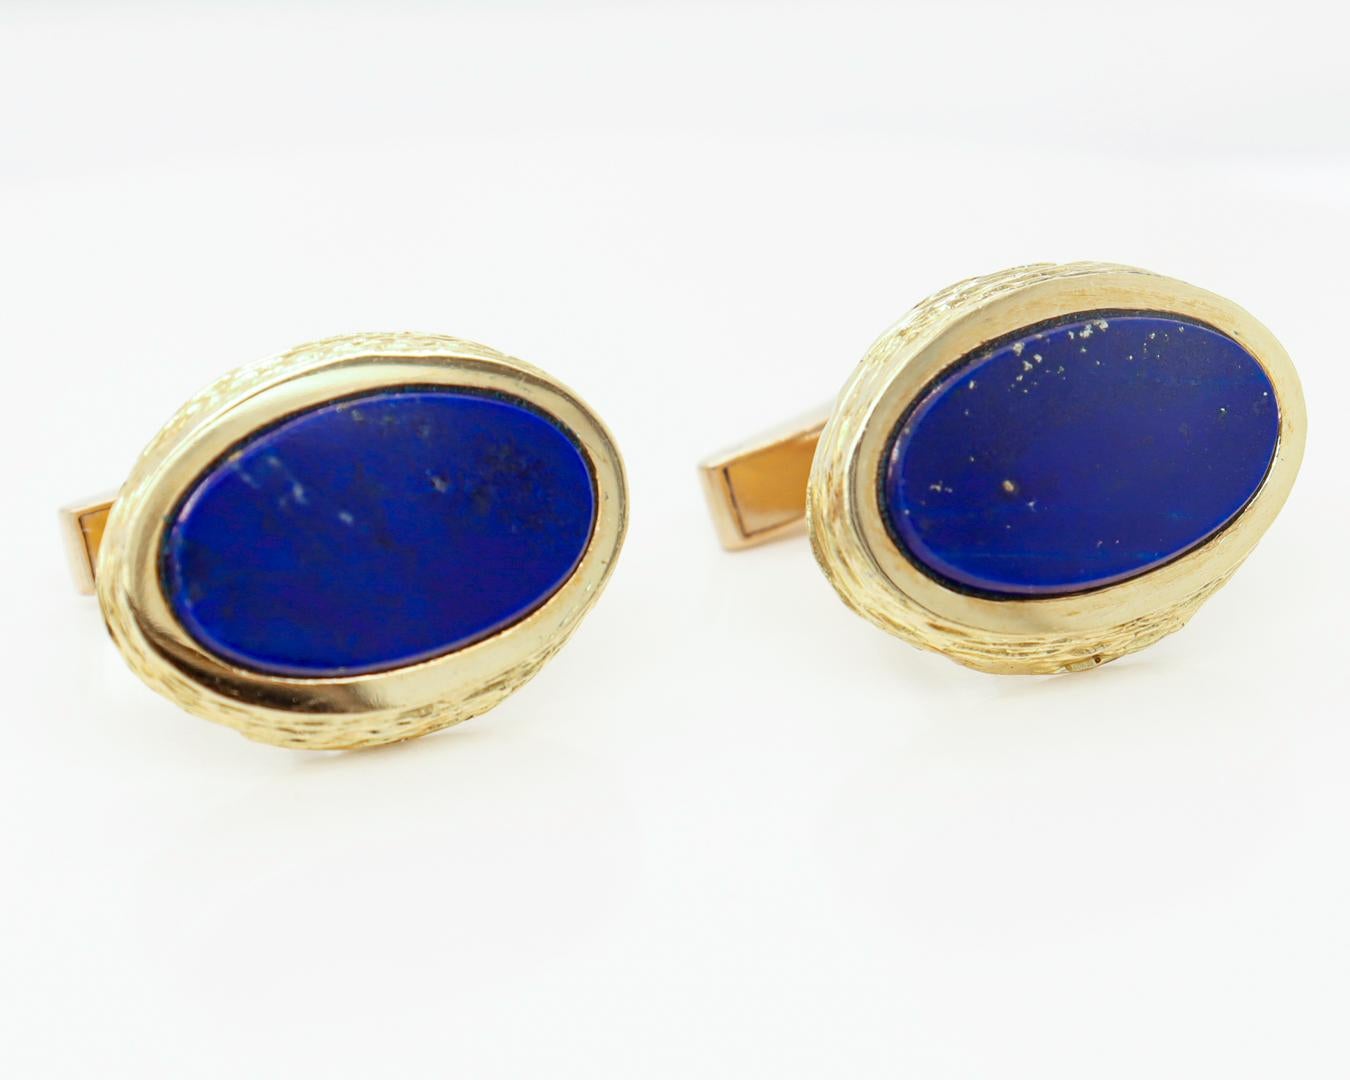 Pair of English Mid-Century Modern 18k Gold & Lapis Cufflinks by Kutchinsky For Sale 1